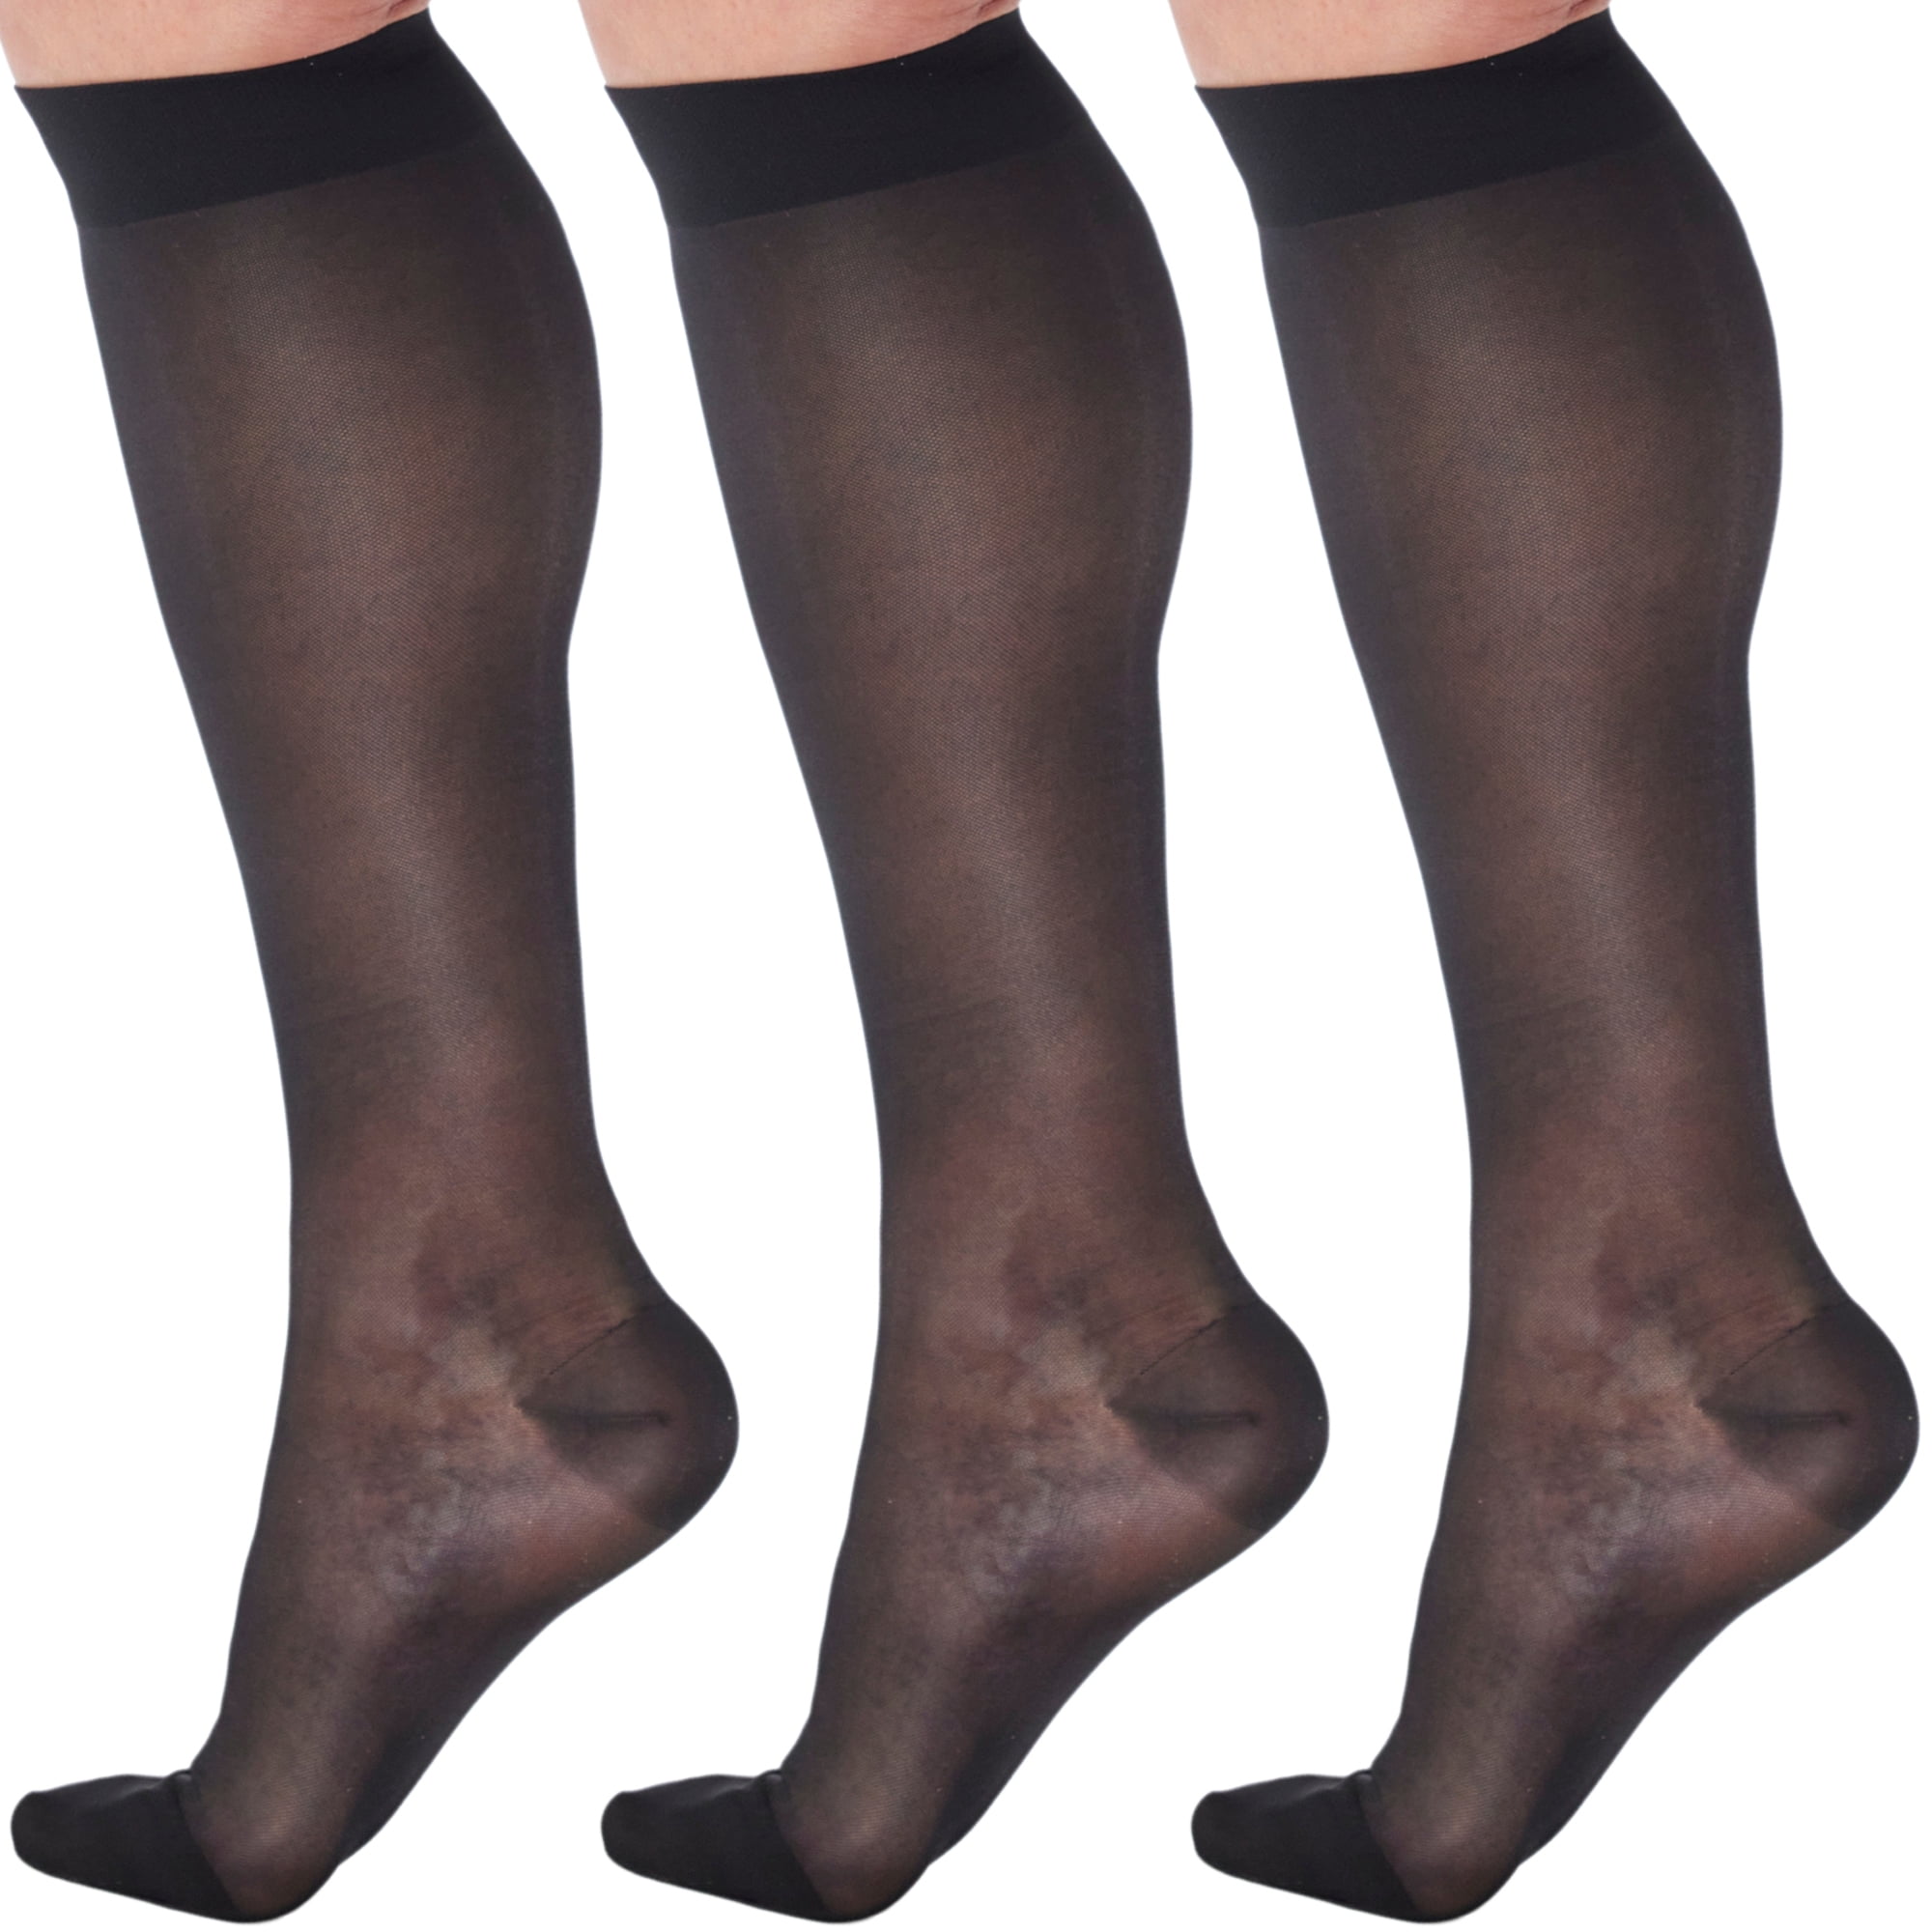 (3 Pairs) Extra Large Compression Socks for Women 15-20mmHg - Black, 6XL